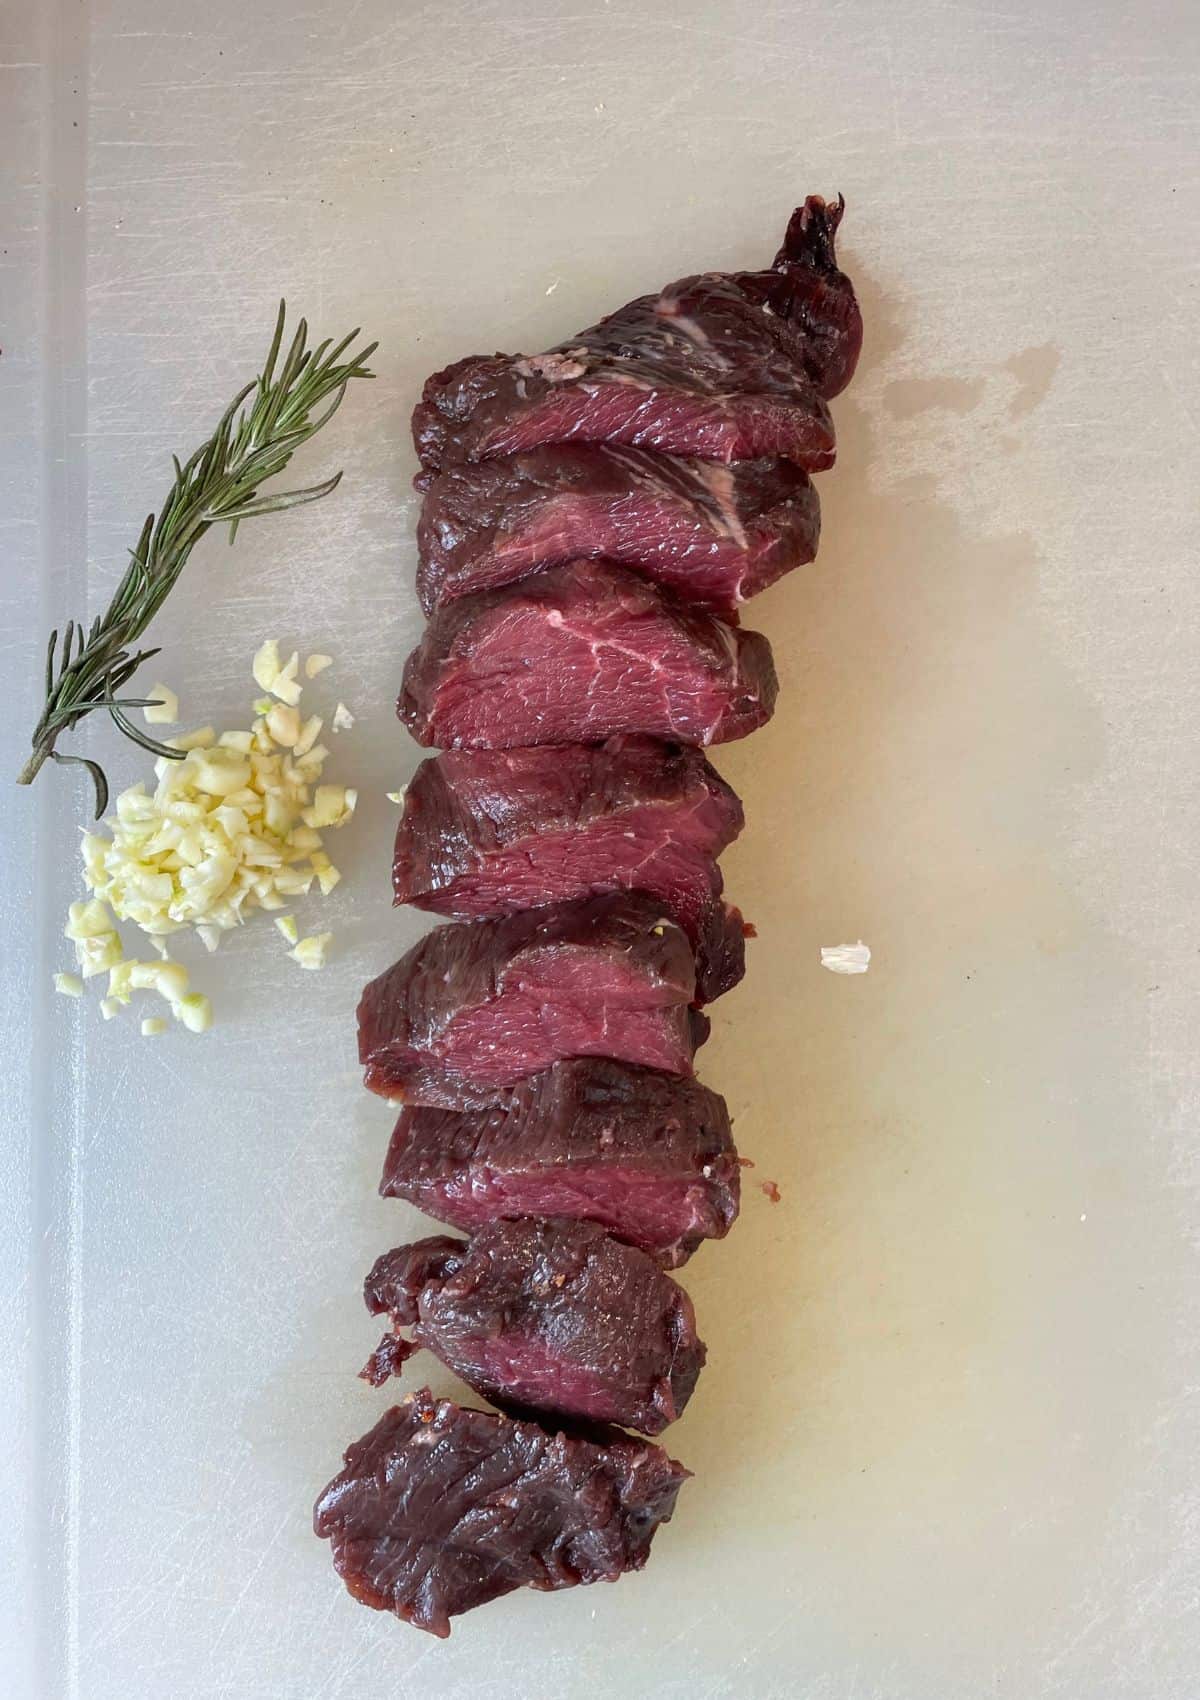 uncooked venison backstrap on cutting board with rosemary and garlic